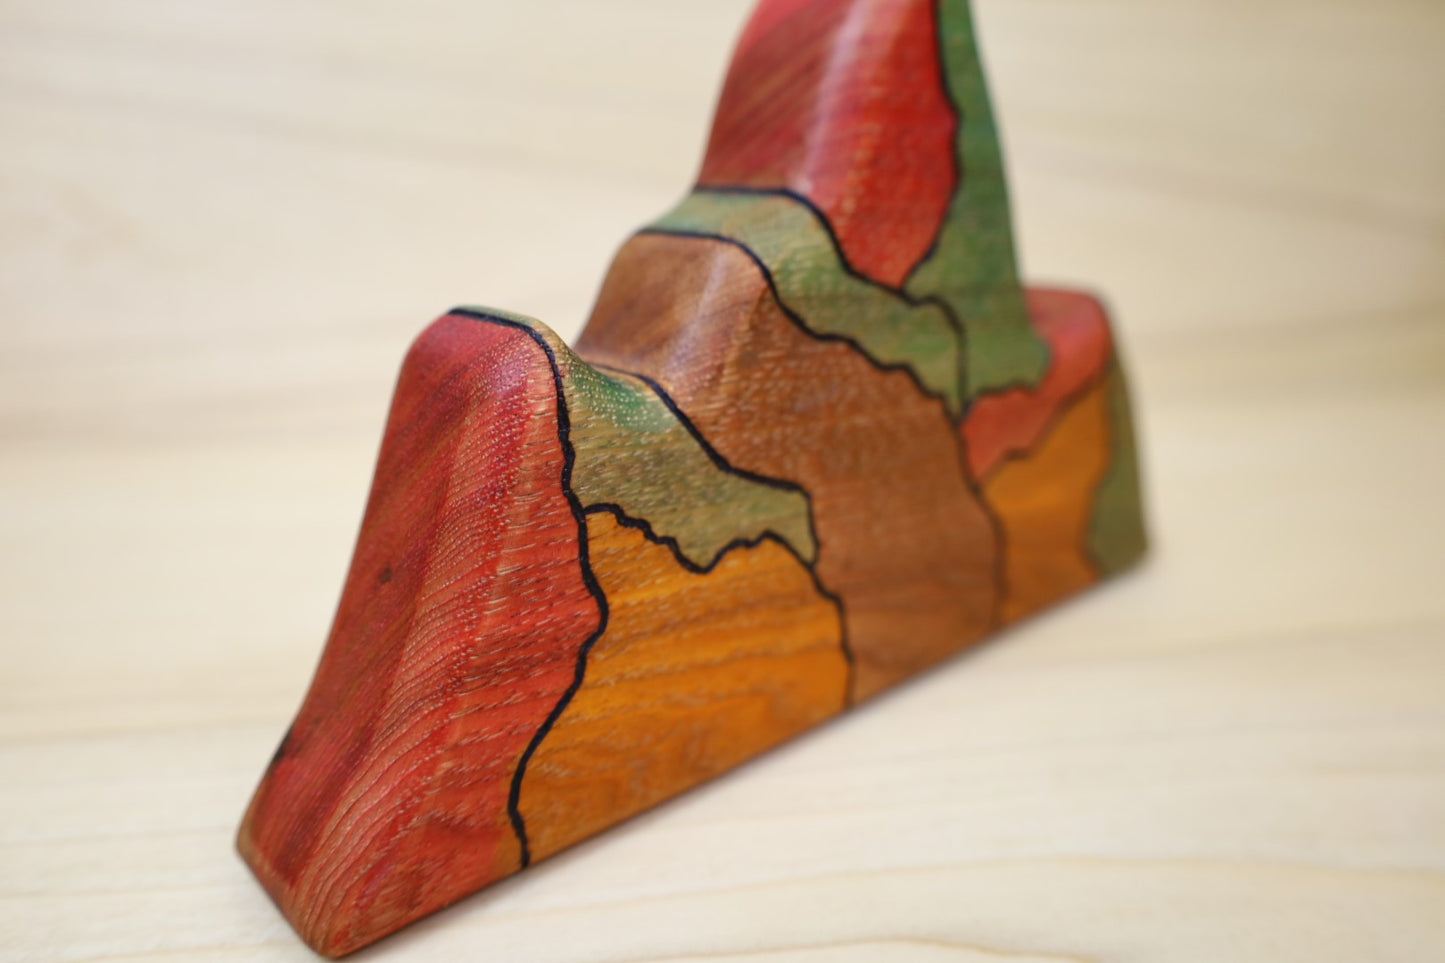 Wooden Mountains Playscape